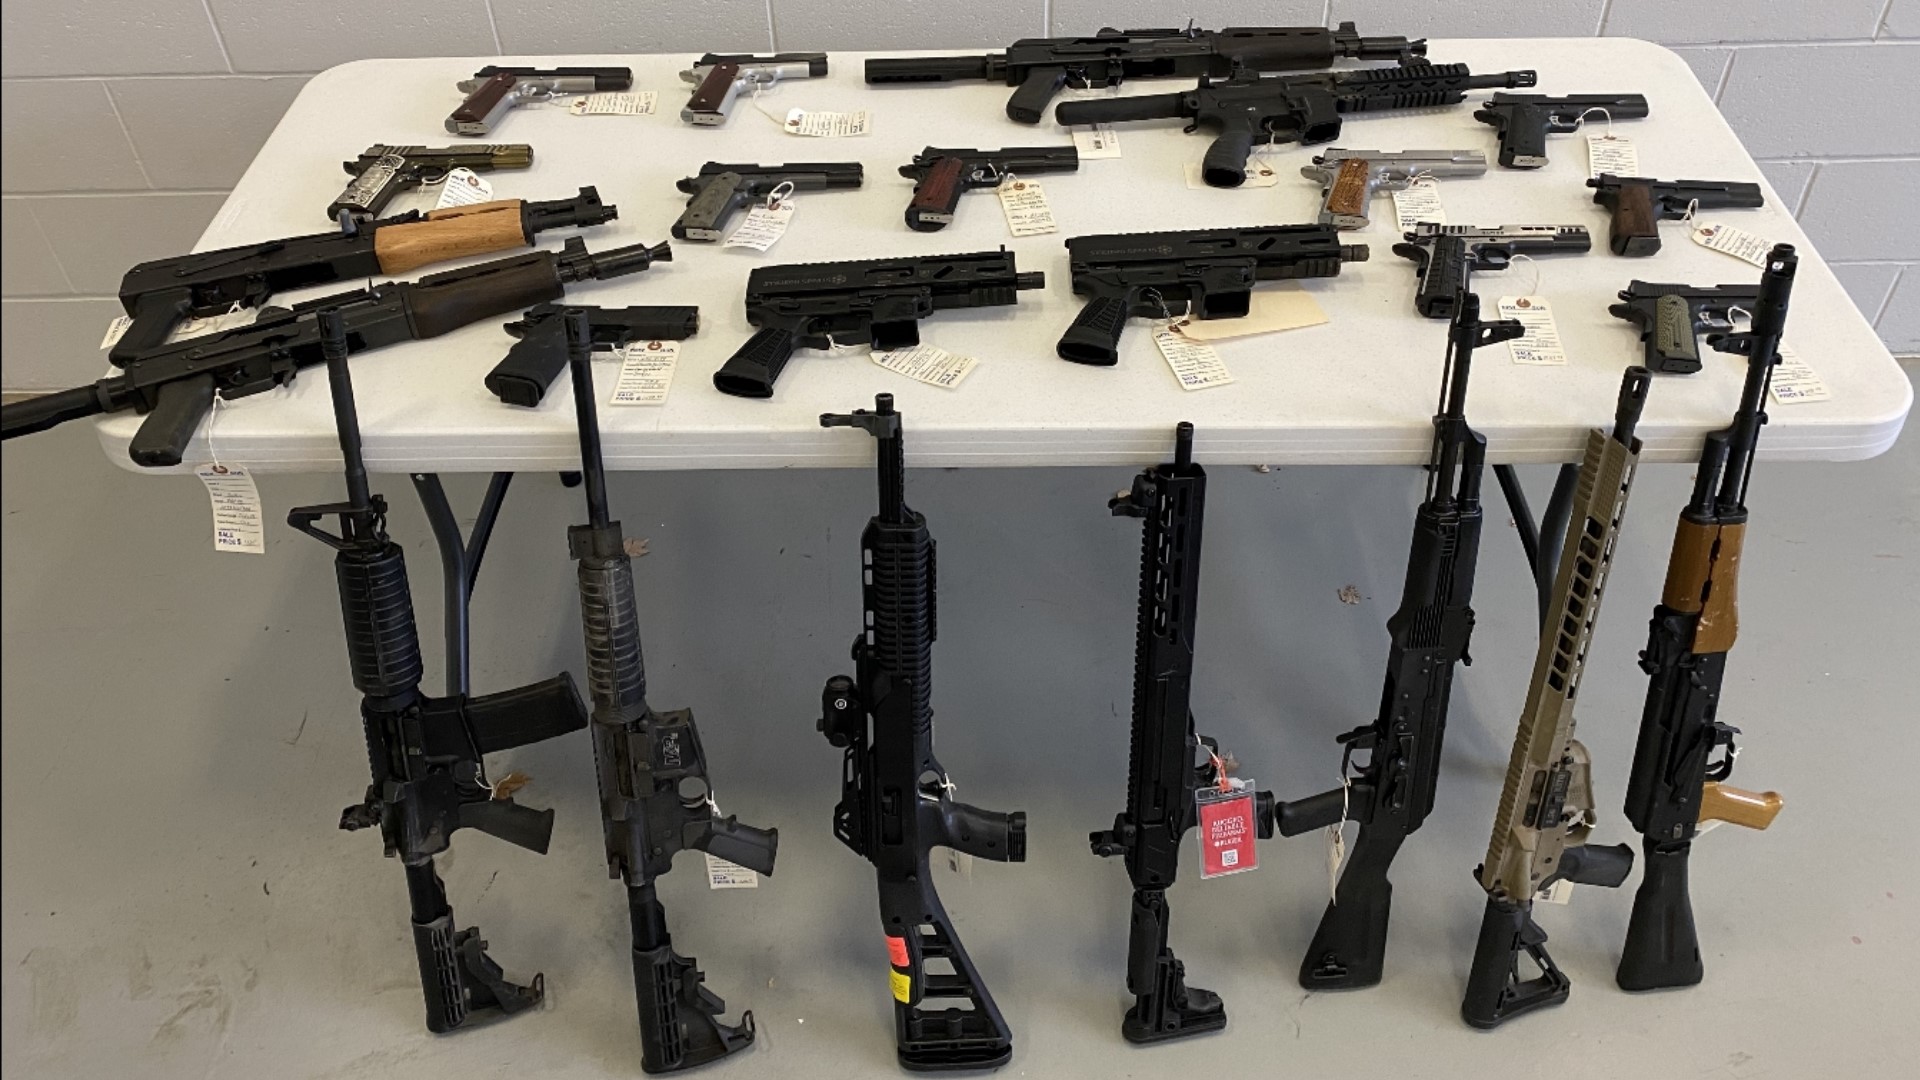 This comes after police arrested seven people, one adult and six teenagers, in connection to a gun store burglary in Jeffersonville, Indiana.